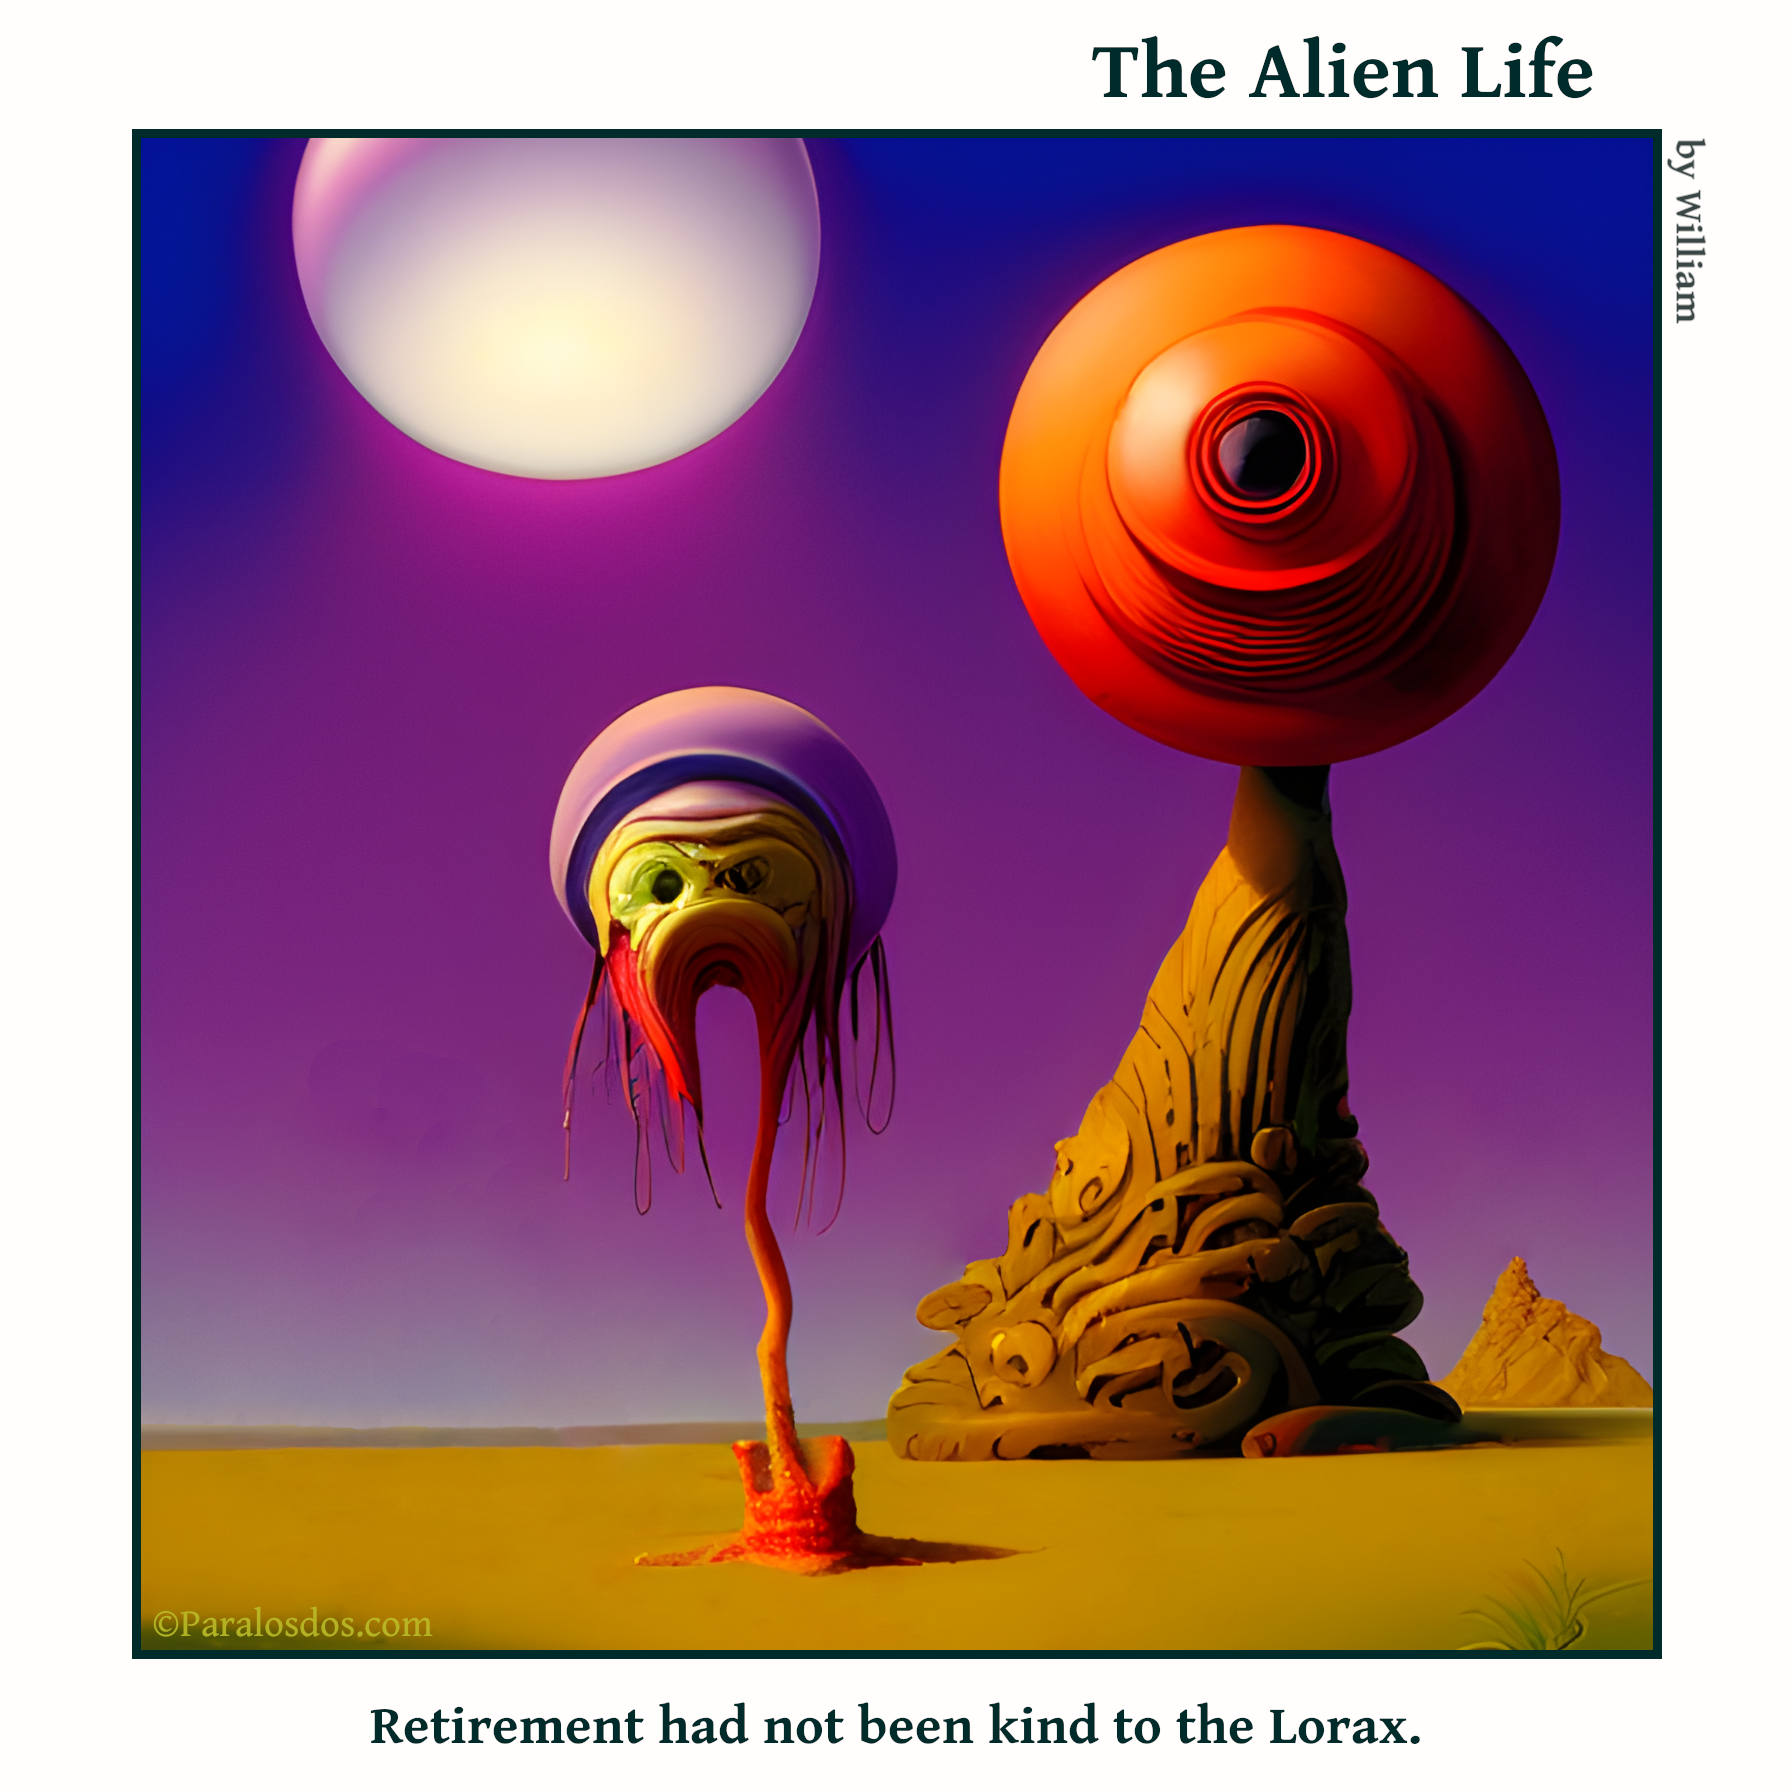 The Alien Life, one panel Comic. An tired and decrepit looking alien kind of resembles the Lorax. If you use your imagination. The caption reads: Retirement had not been kind to the Lorax.